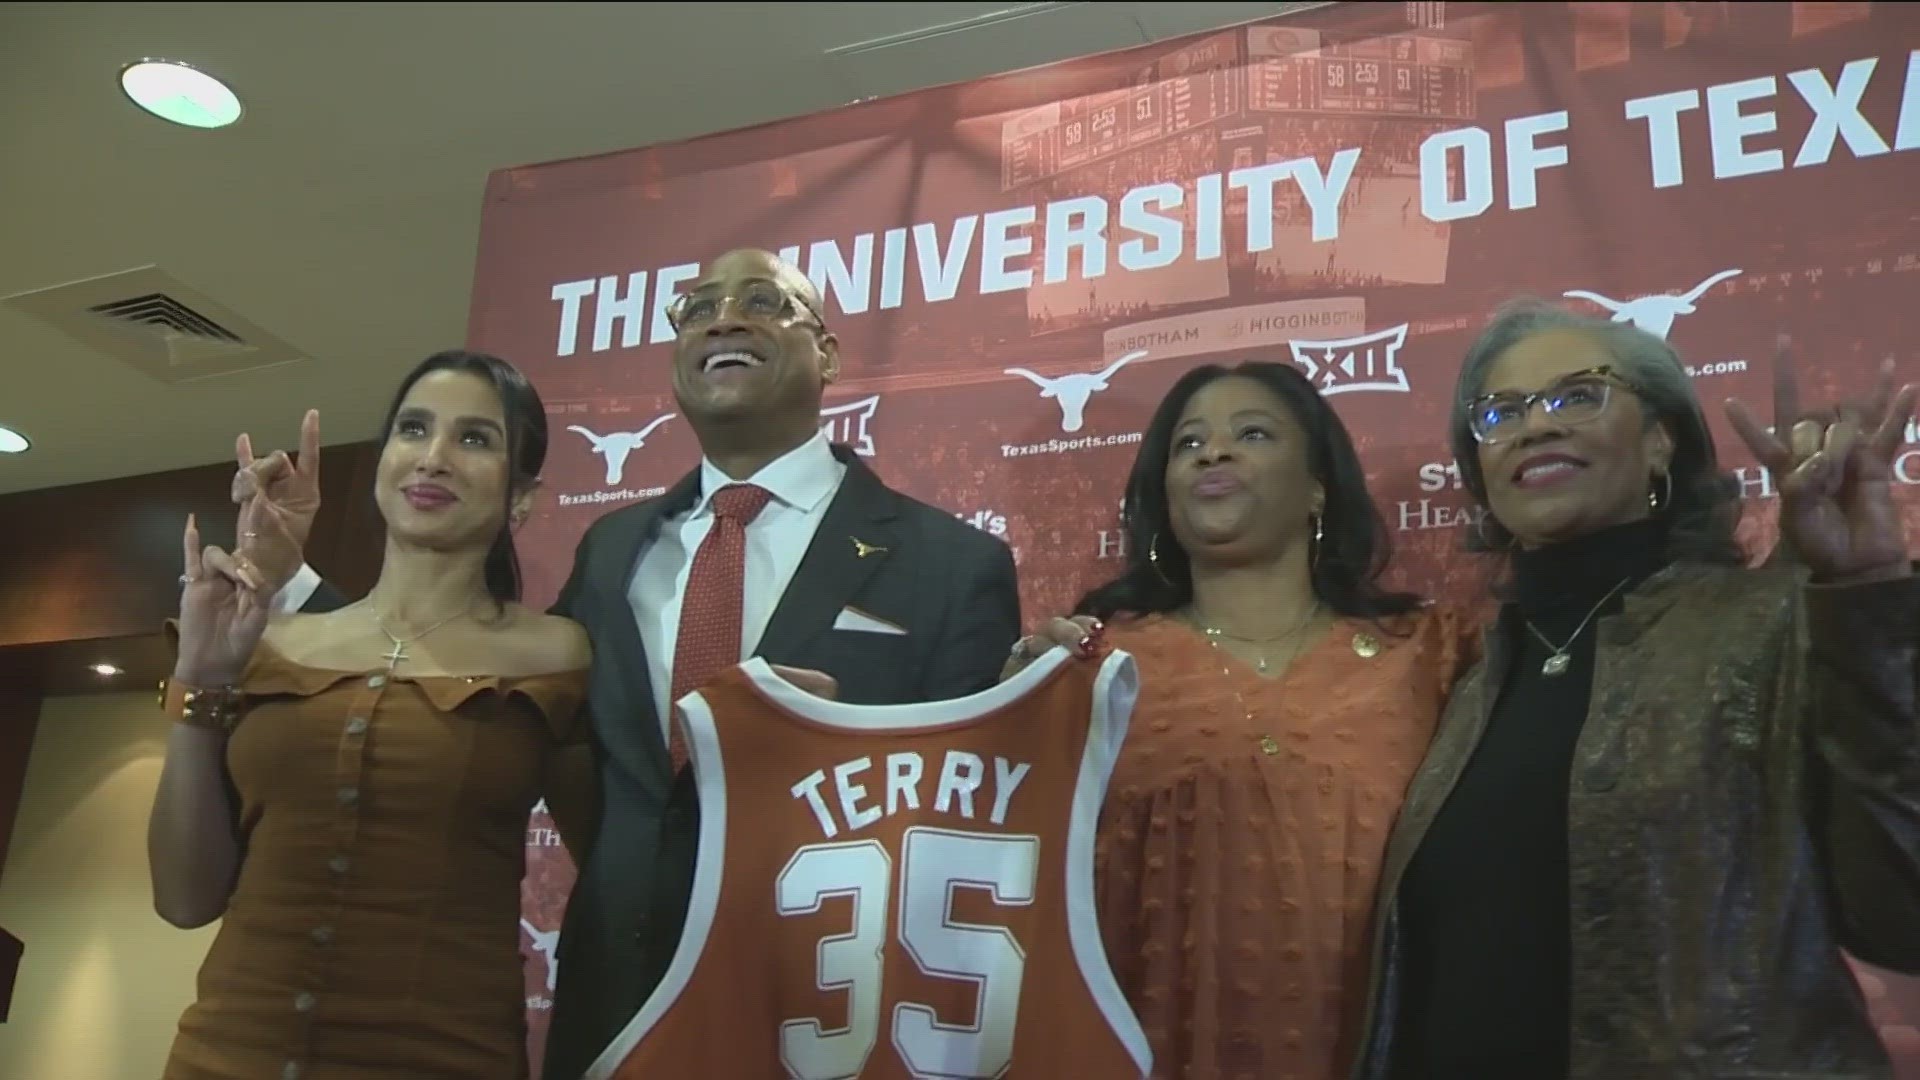 Terry was given the head coaching gig on Monday after leading the Longhorns to the Elite 8 this past season as interim coach.